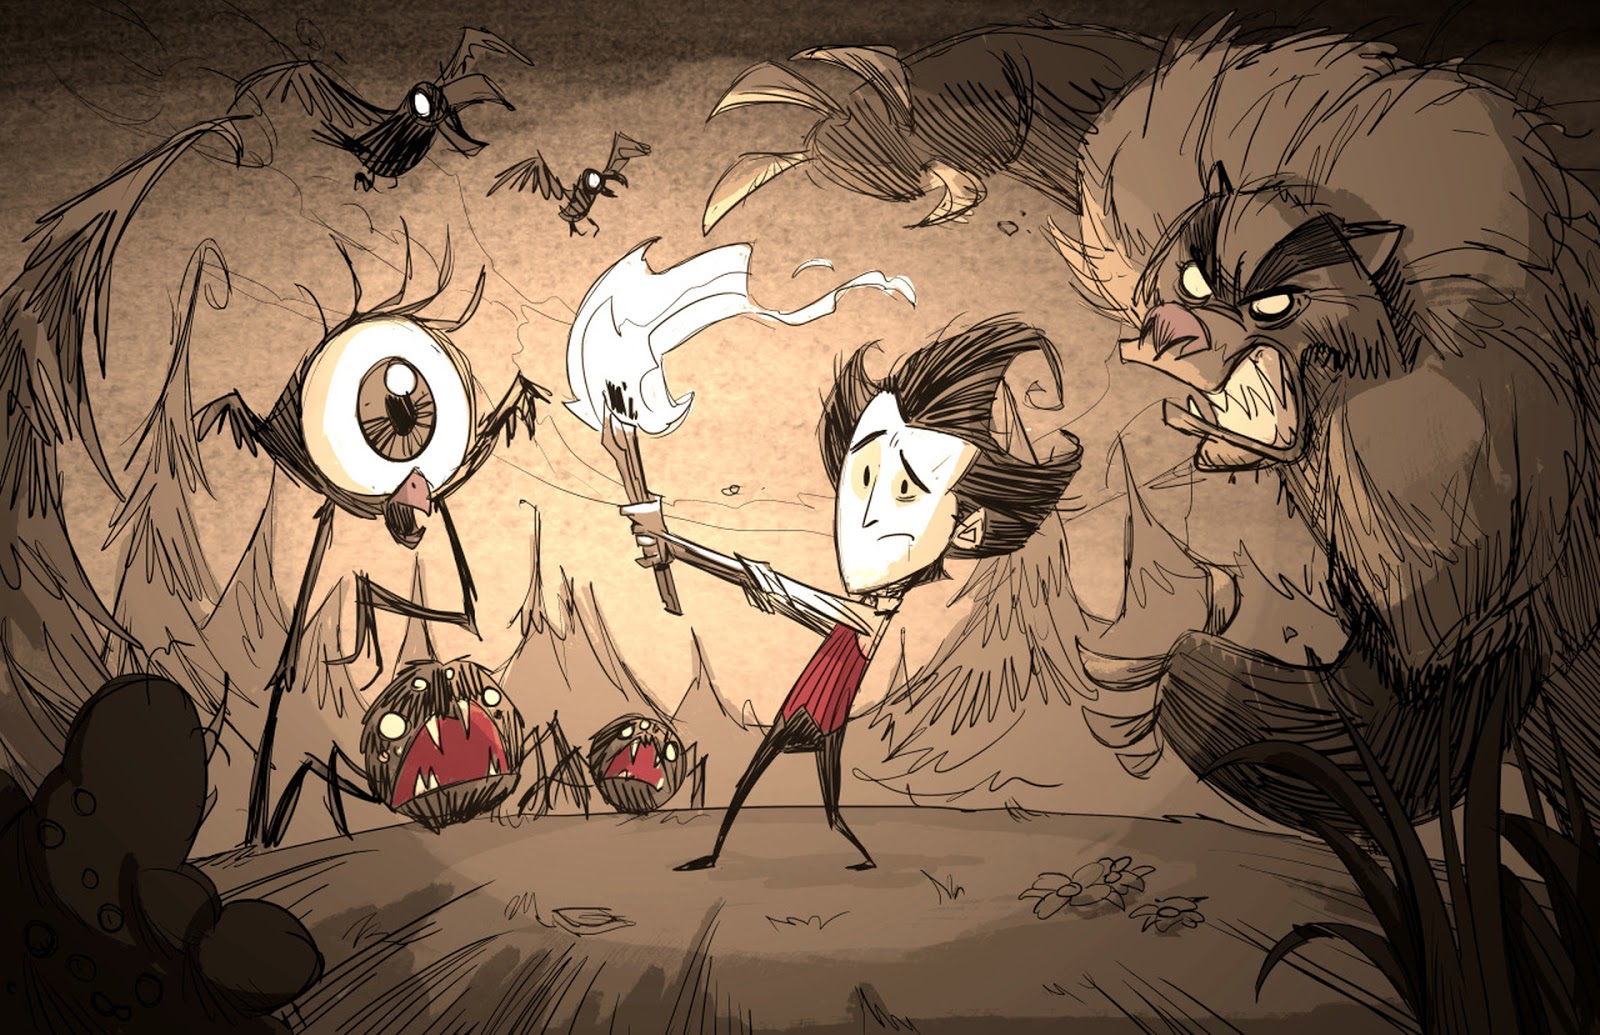 Don t starve together six update. Уилсон don't Starve Art. Don't Starve together Уилсон Art. Неголодайка Уилсон. Уилсон don't Starve концепт.